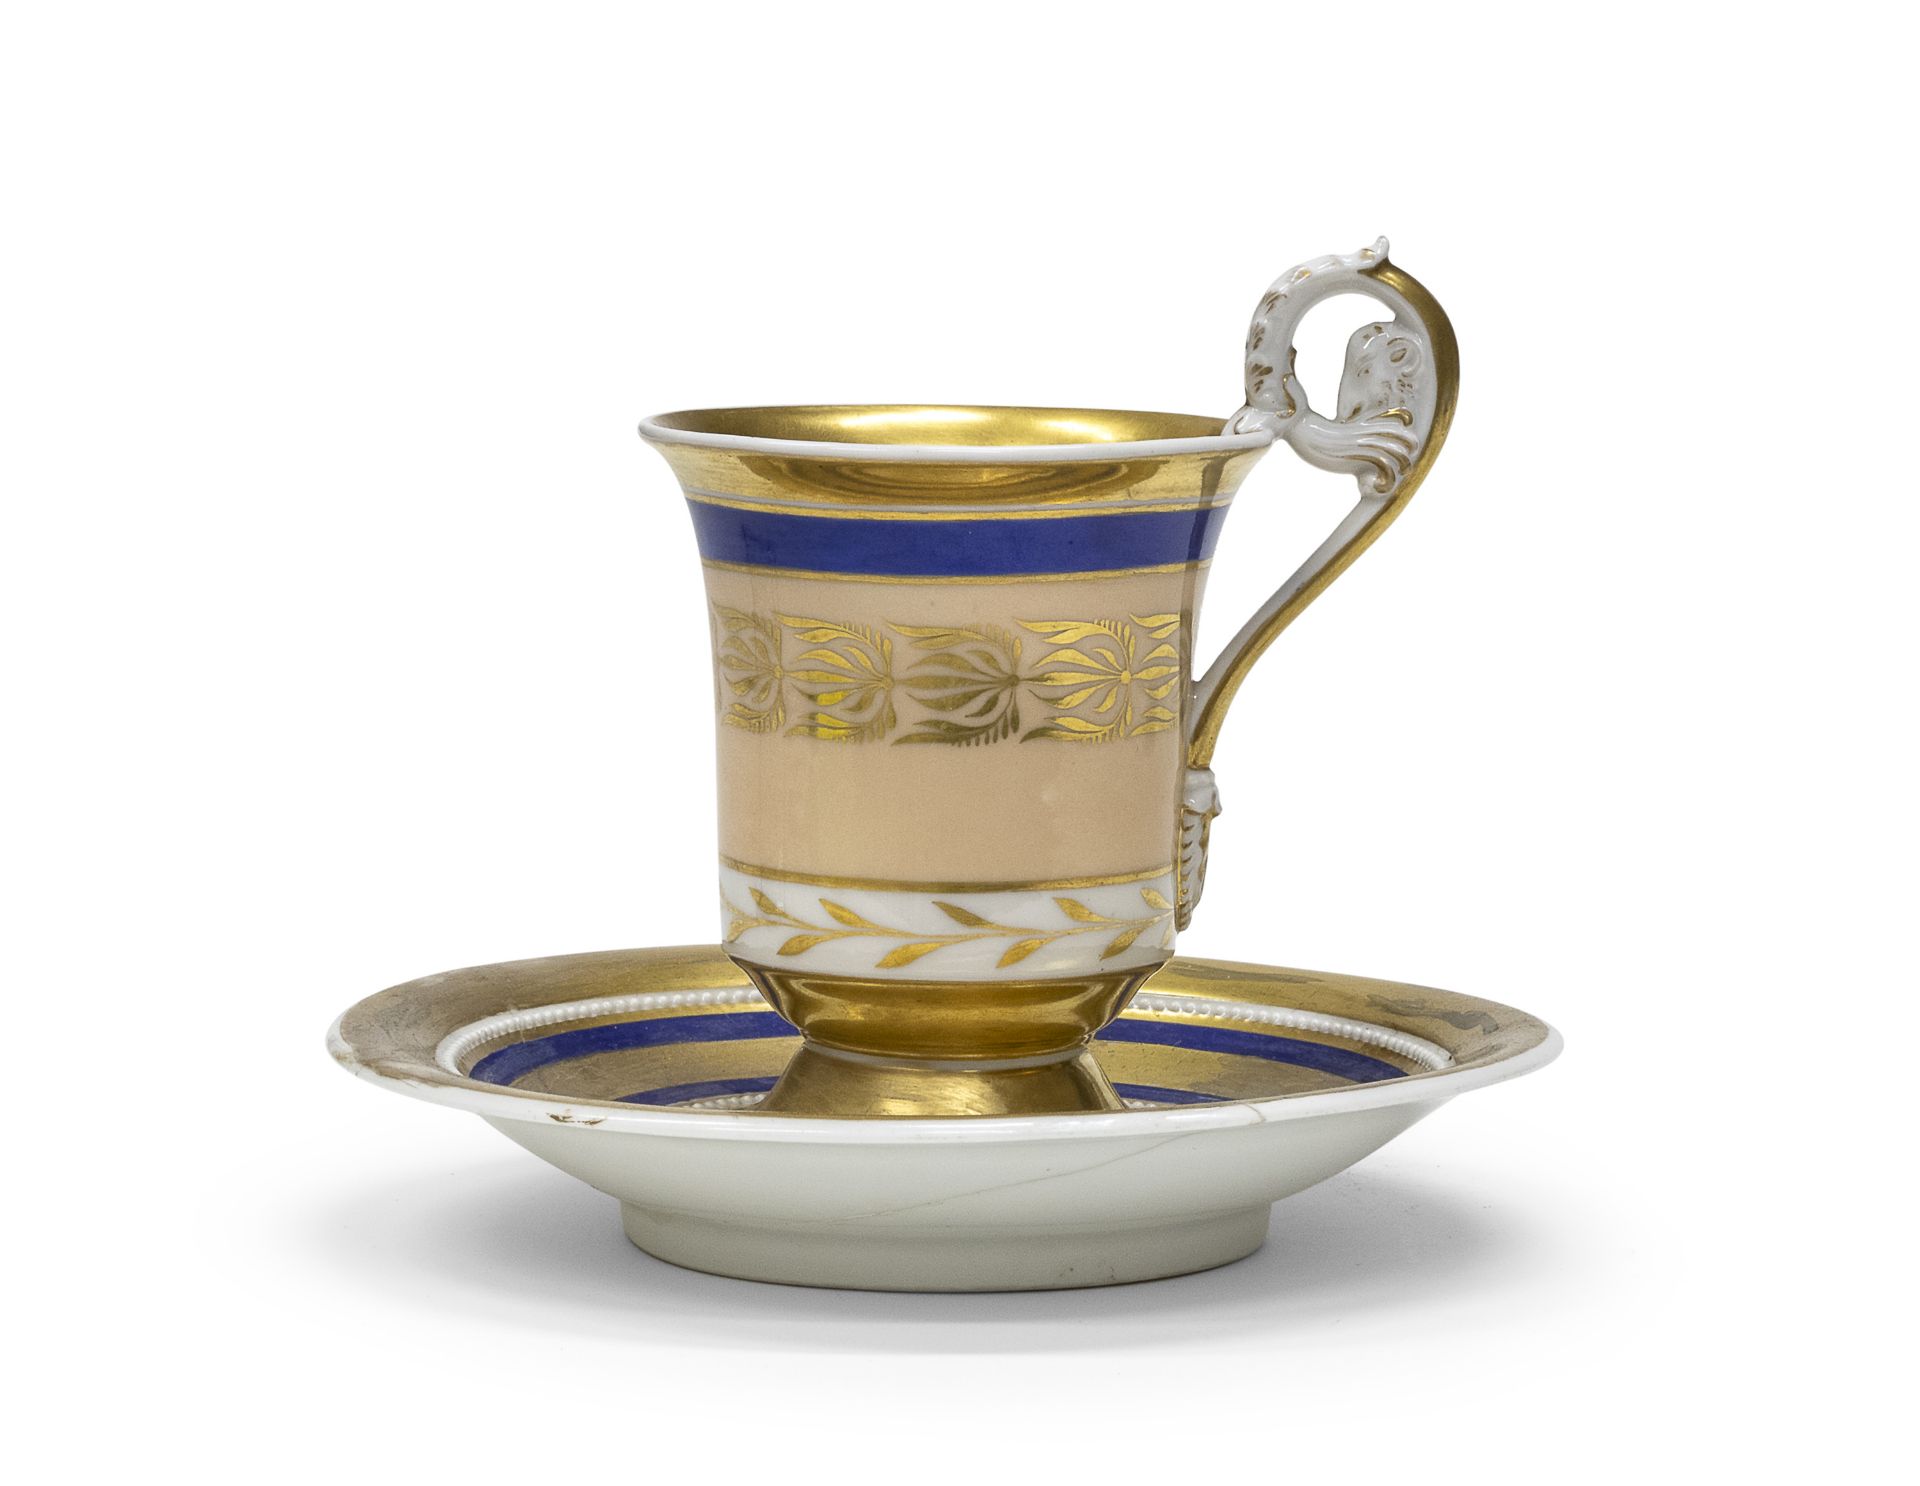 PORCELAIN CUP AND SAUCER BERLIN 19TH CENTURY